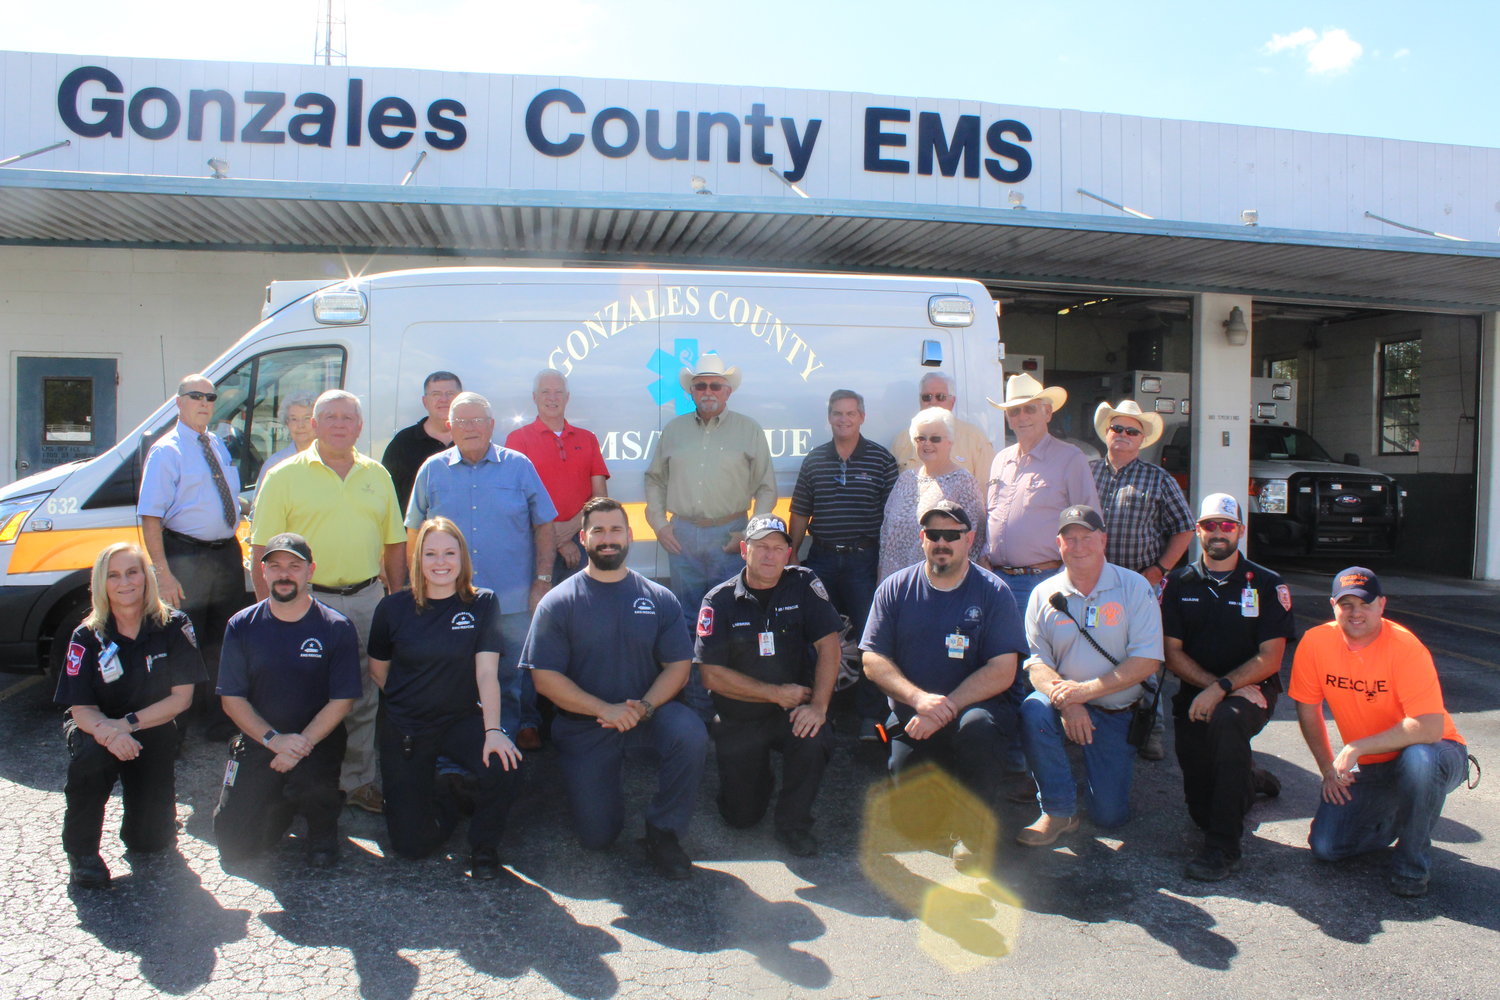 The Gonzales County Health Foundation recently donated a new 2018 transport ambulance ($66,250) and $20,000 towards new communication equipment to the Gonzales County Emergency Medical Services(EMS) and Rescue teams. Pictured in front of the new ambulance are members of EMS, Rescue and Gonzales County Health Foundation board members.